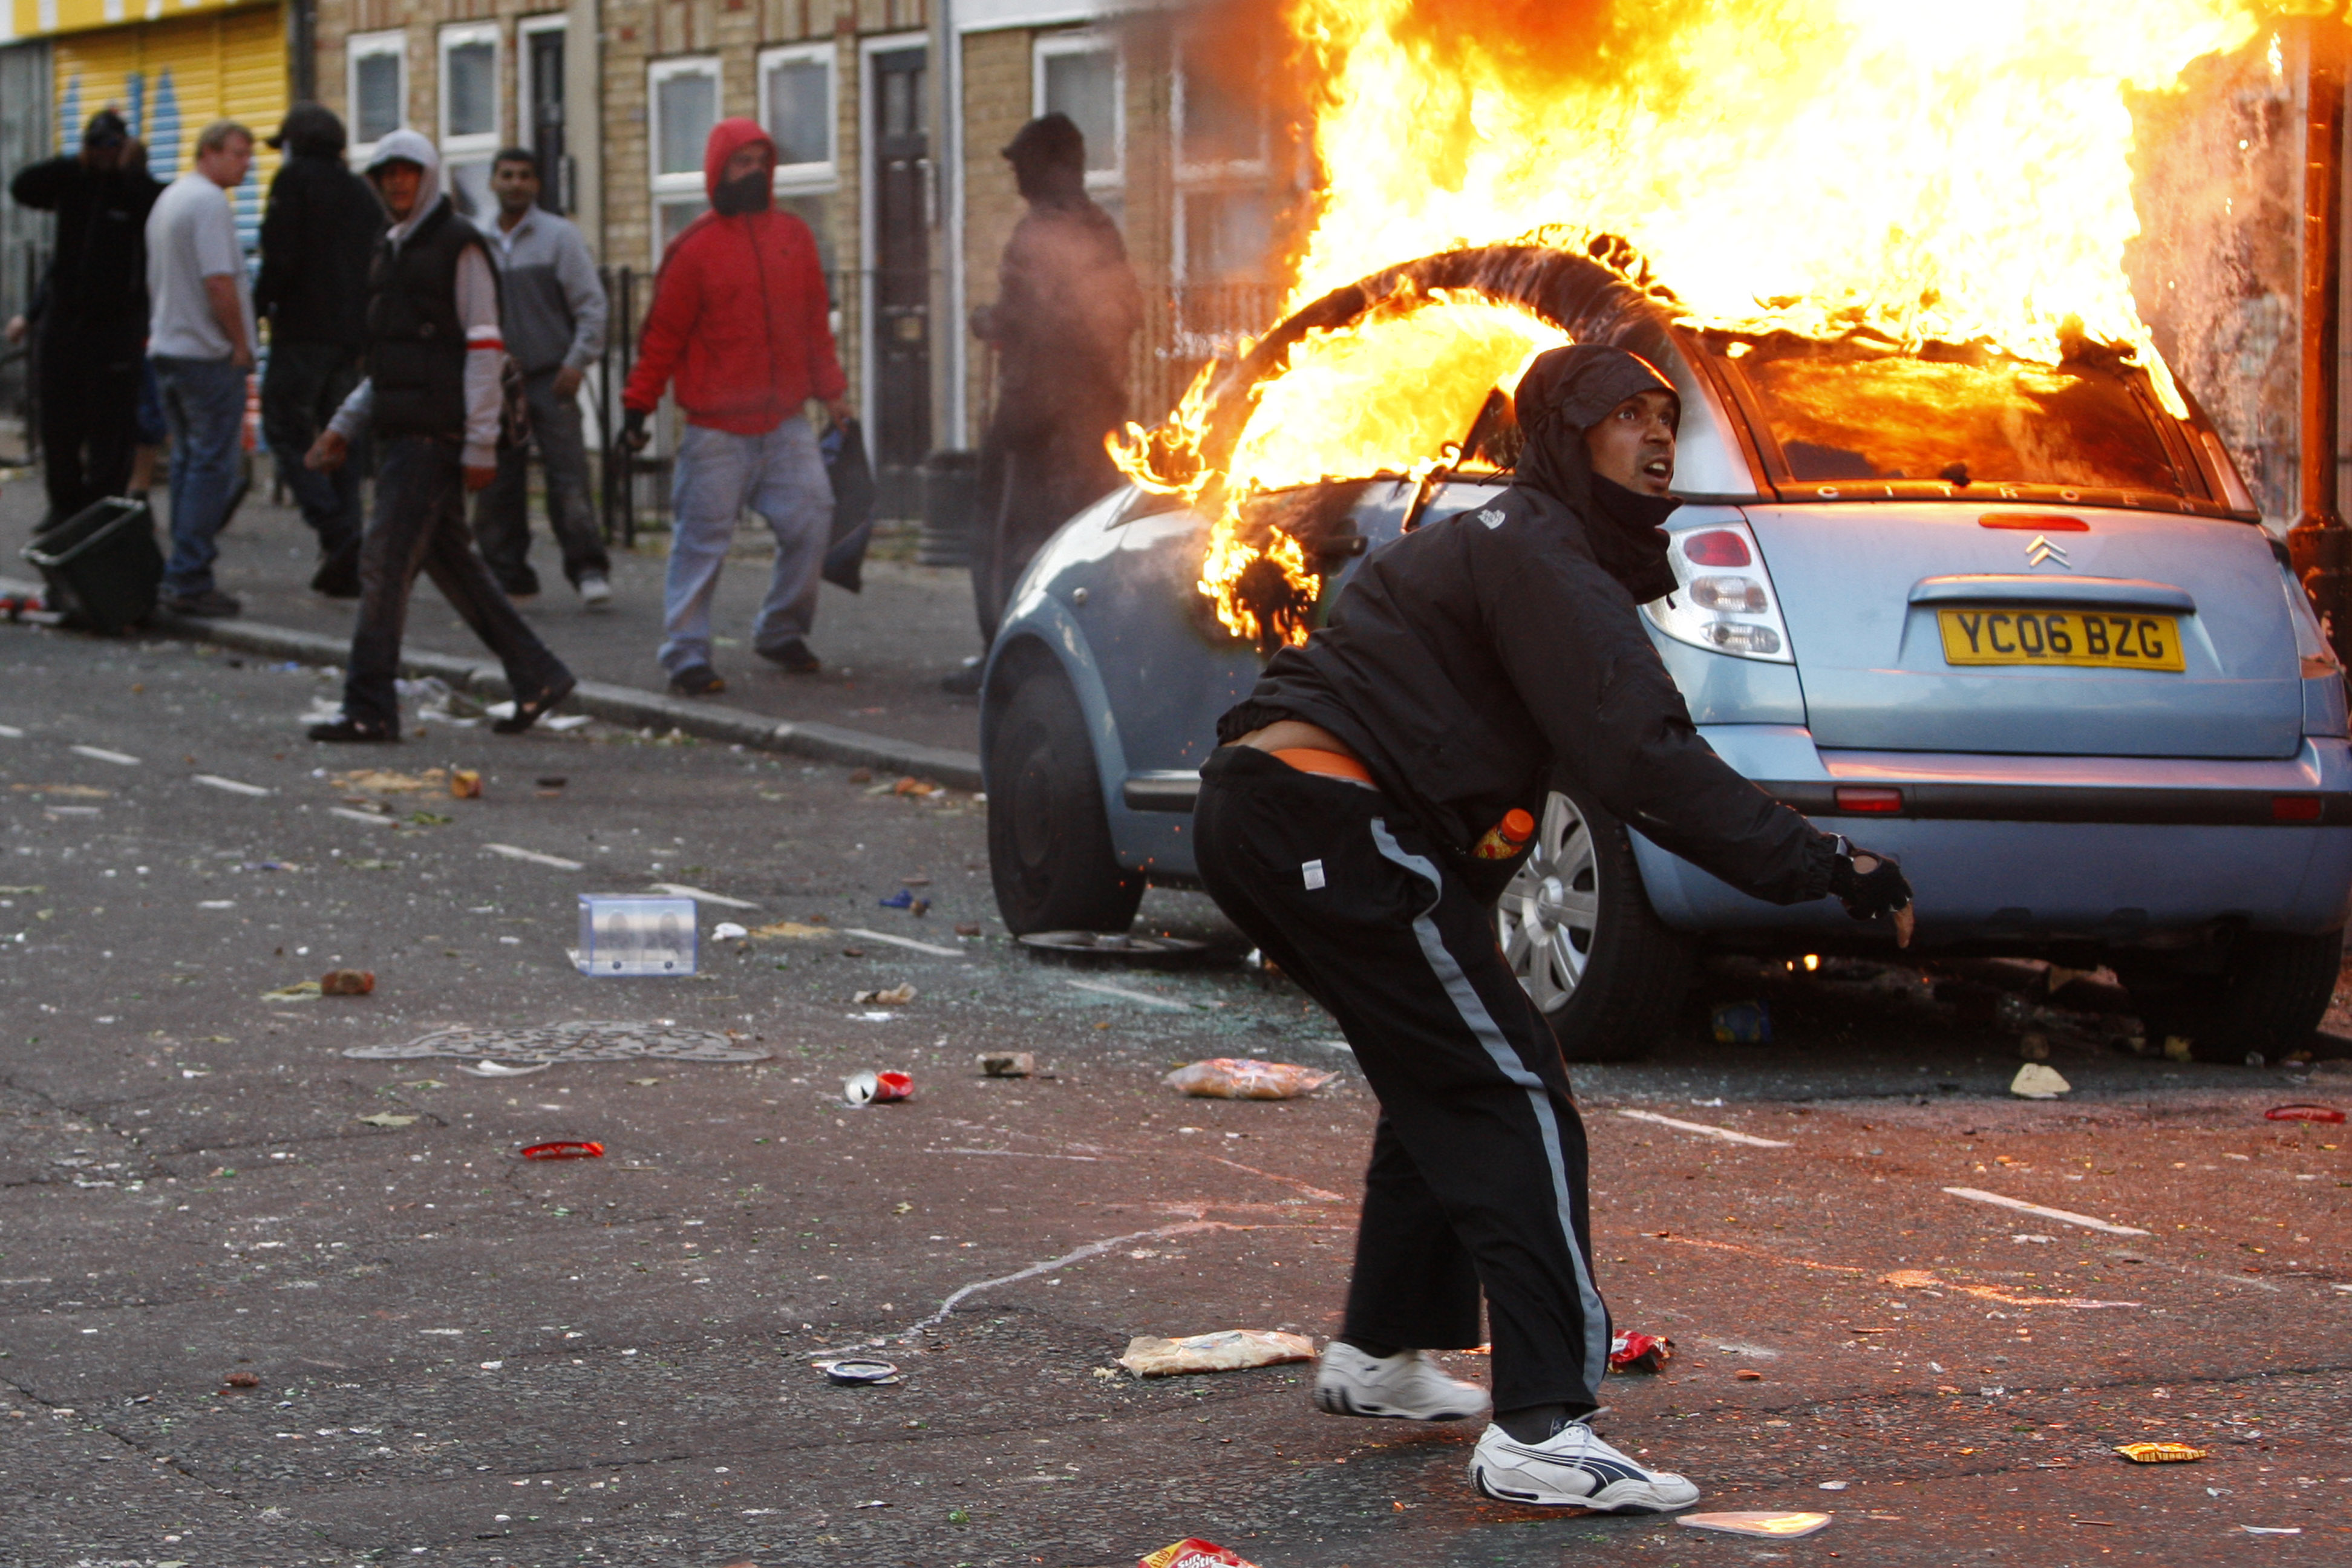 What the BBC classified as ‘riots’ in London become ‘protests’ in Beitounya